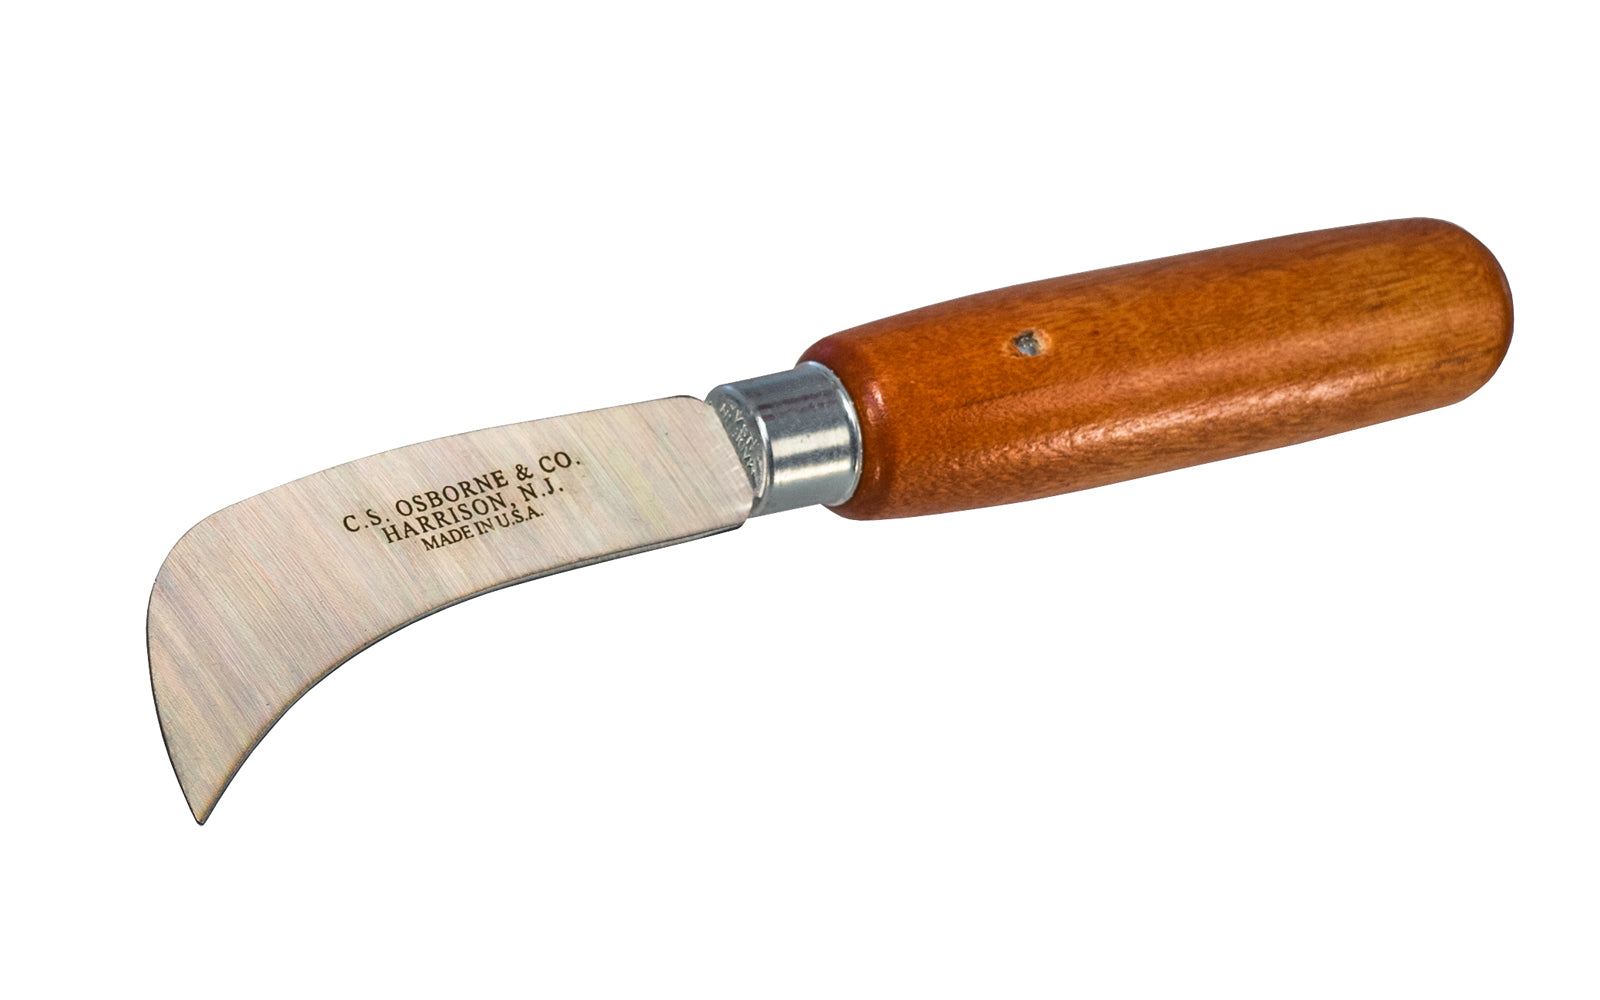 CS Osborne Hawk Bill Knife - 3" Blade ~ No. 420 - Made of the finest cutlery steel. Lacquered, pinned hardwood handle - #420 Knife ~ Made in USA ~ 096685601007